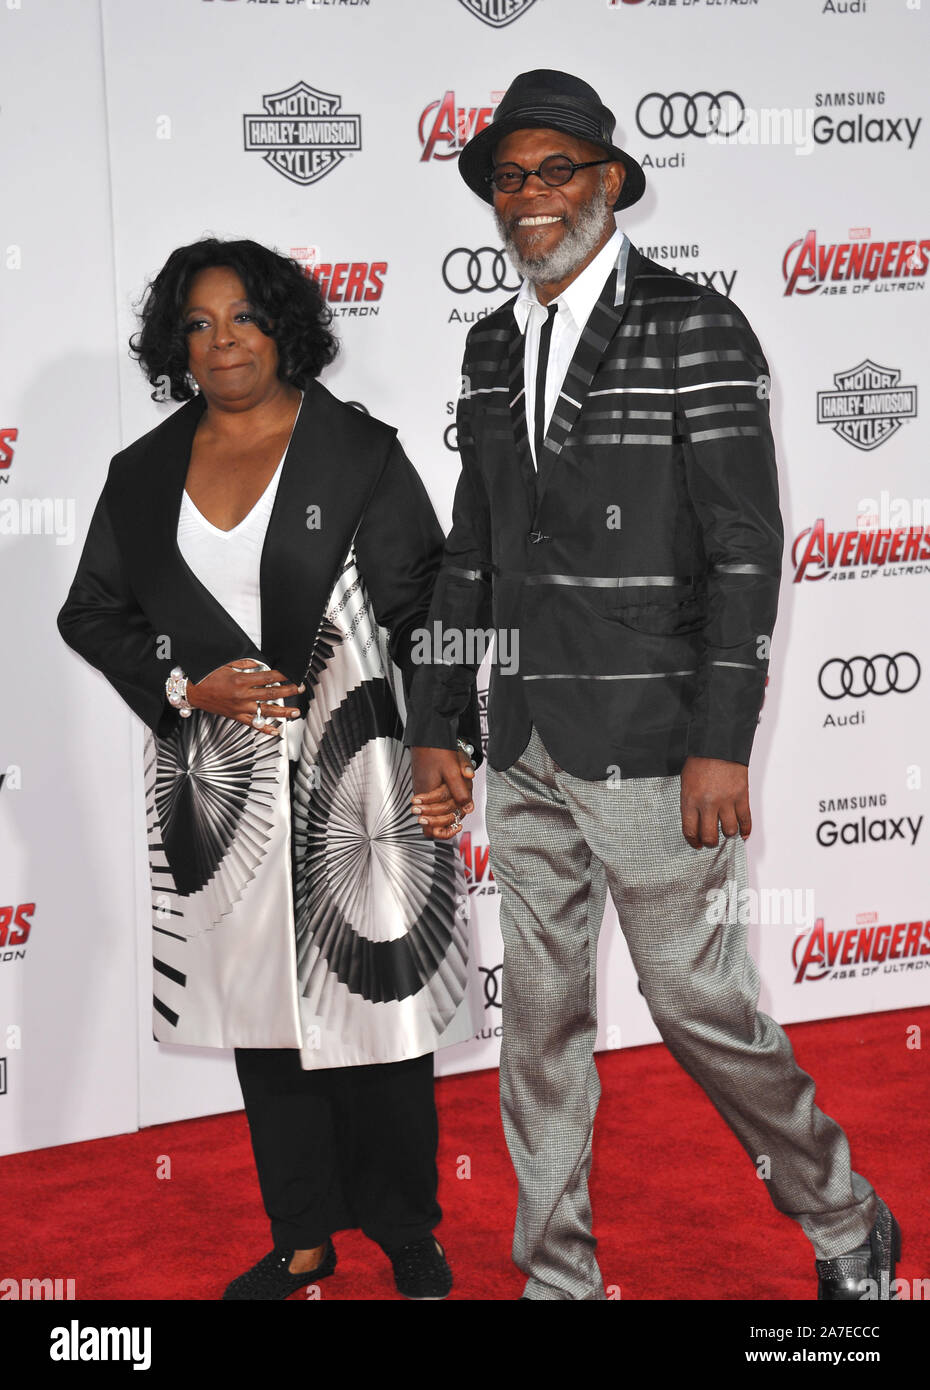 LOS ANGELES, CA - APRIL 13, 2015: Samuel L. Jackson & wife LaTanya Richardson at the world premiere of his movie 'Avengers: Age of Ultron' at the Dolby Theatre, Hollywood. © 2015 Paul Smith / Featureflash Stock Photo